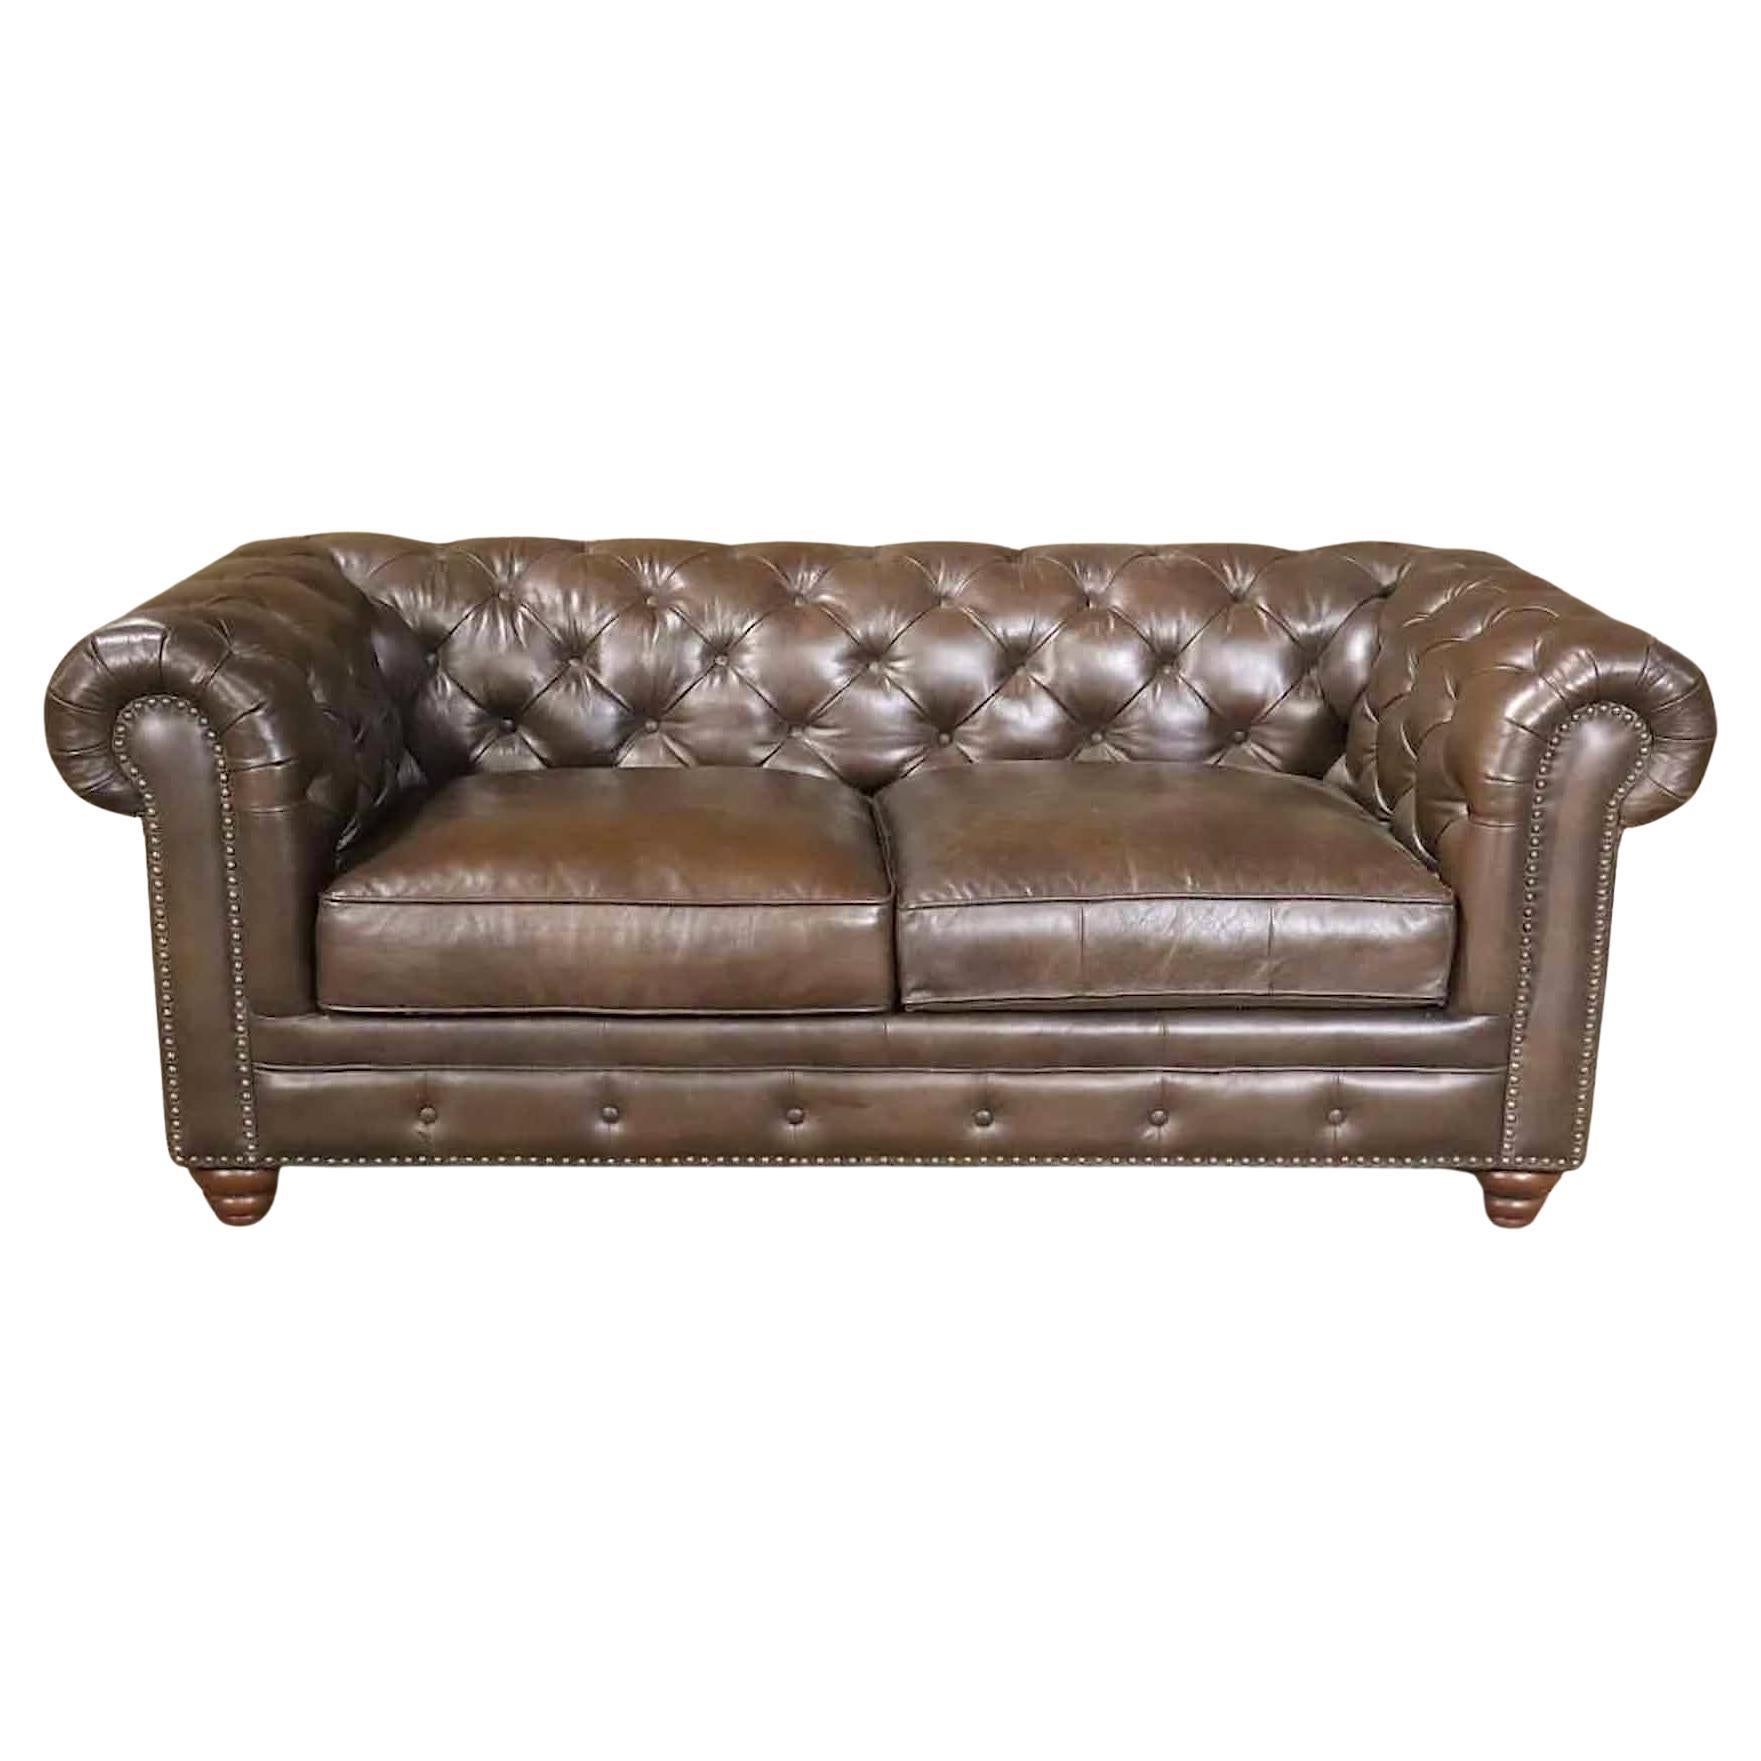 Vintage Chesterfield Sofa For Sale